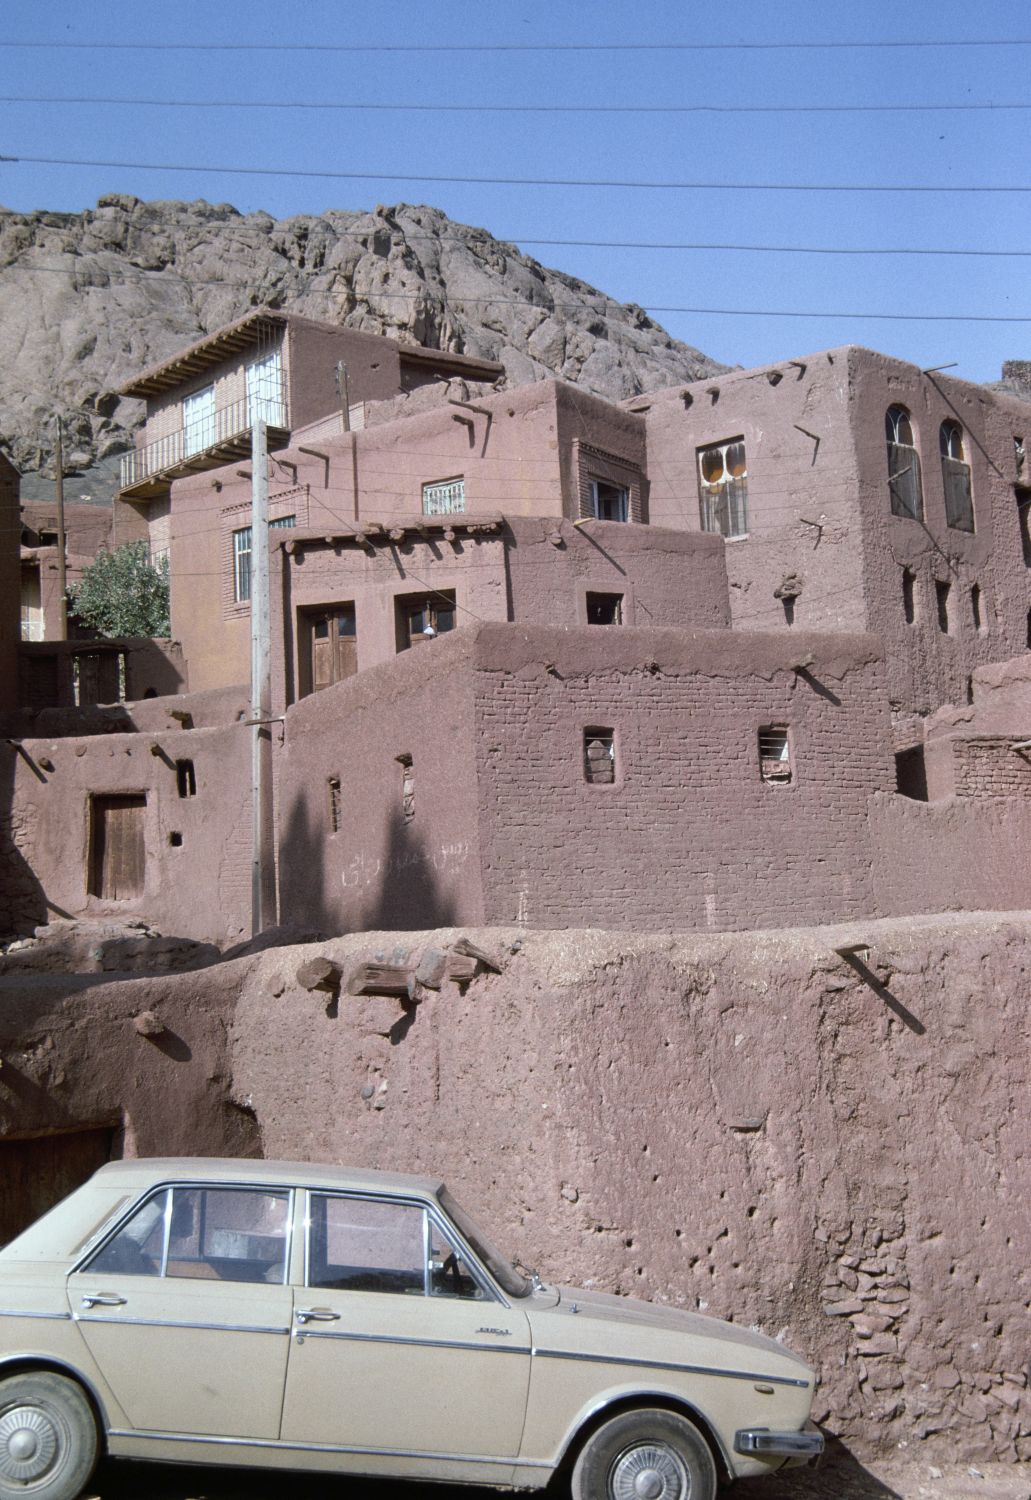 Abyanah  - View of houses in Abyanah, Iran.